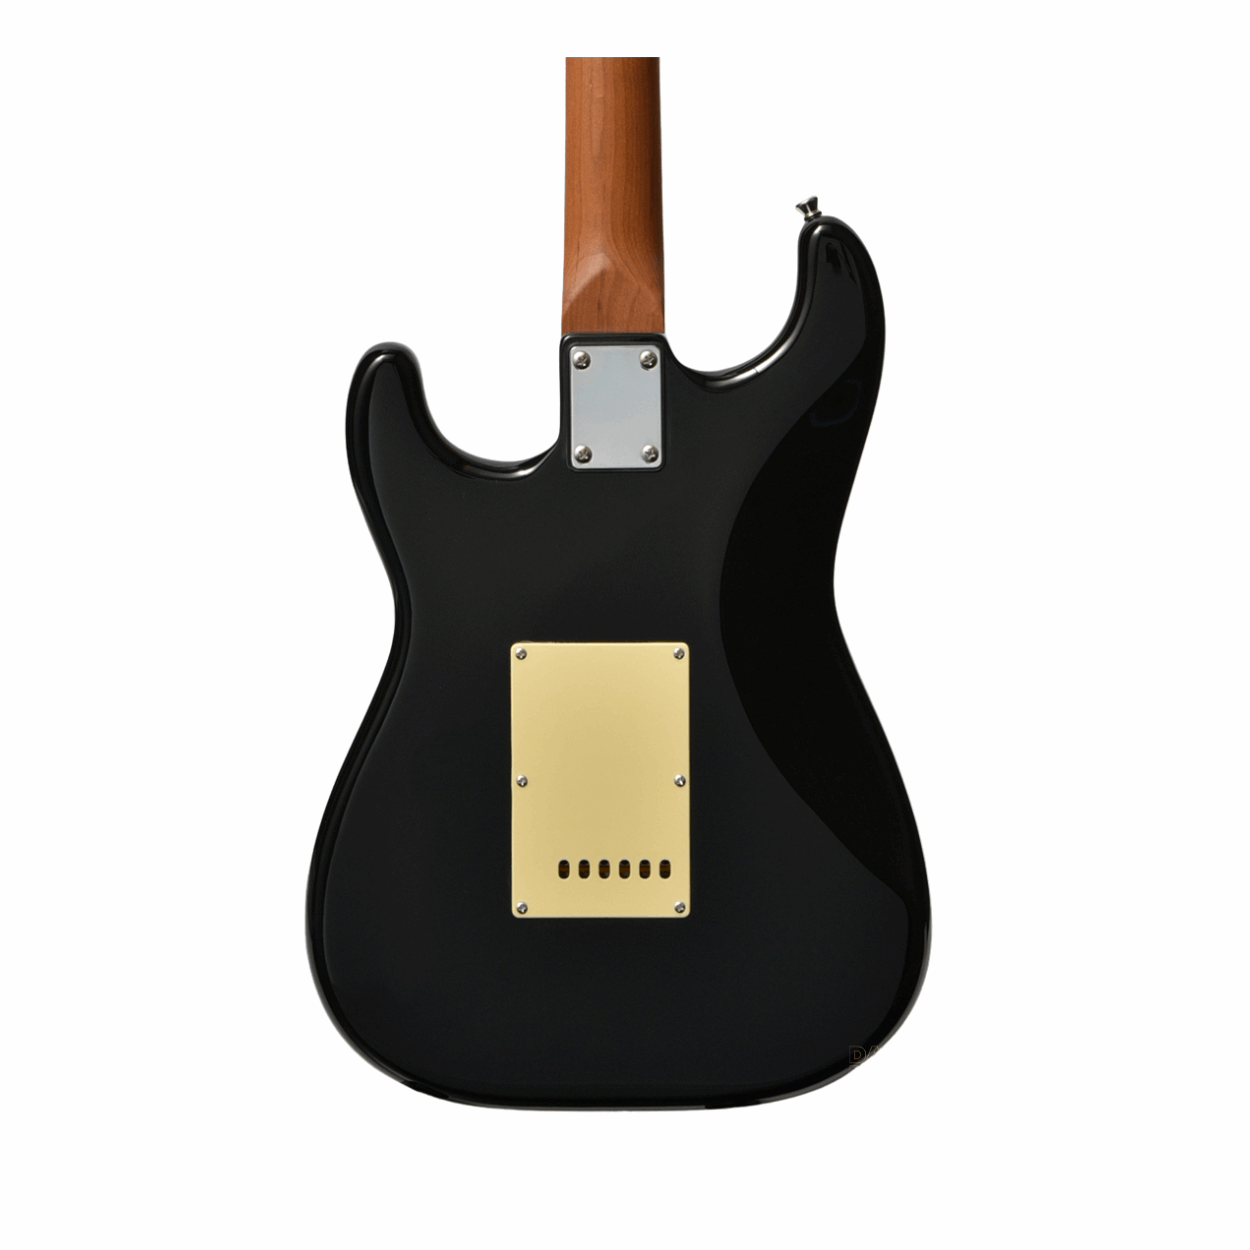 Bacchus Bst-1-rsm/m-blk Universe Series Roasted Maple Electric Guitar, Black With Bag